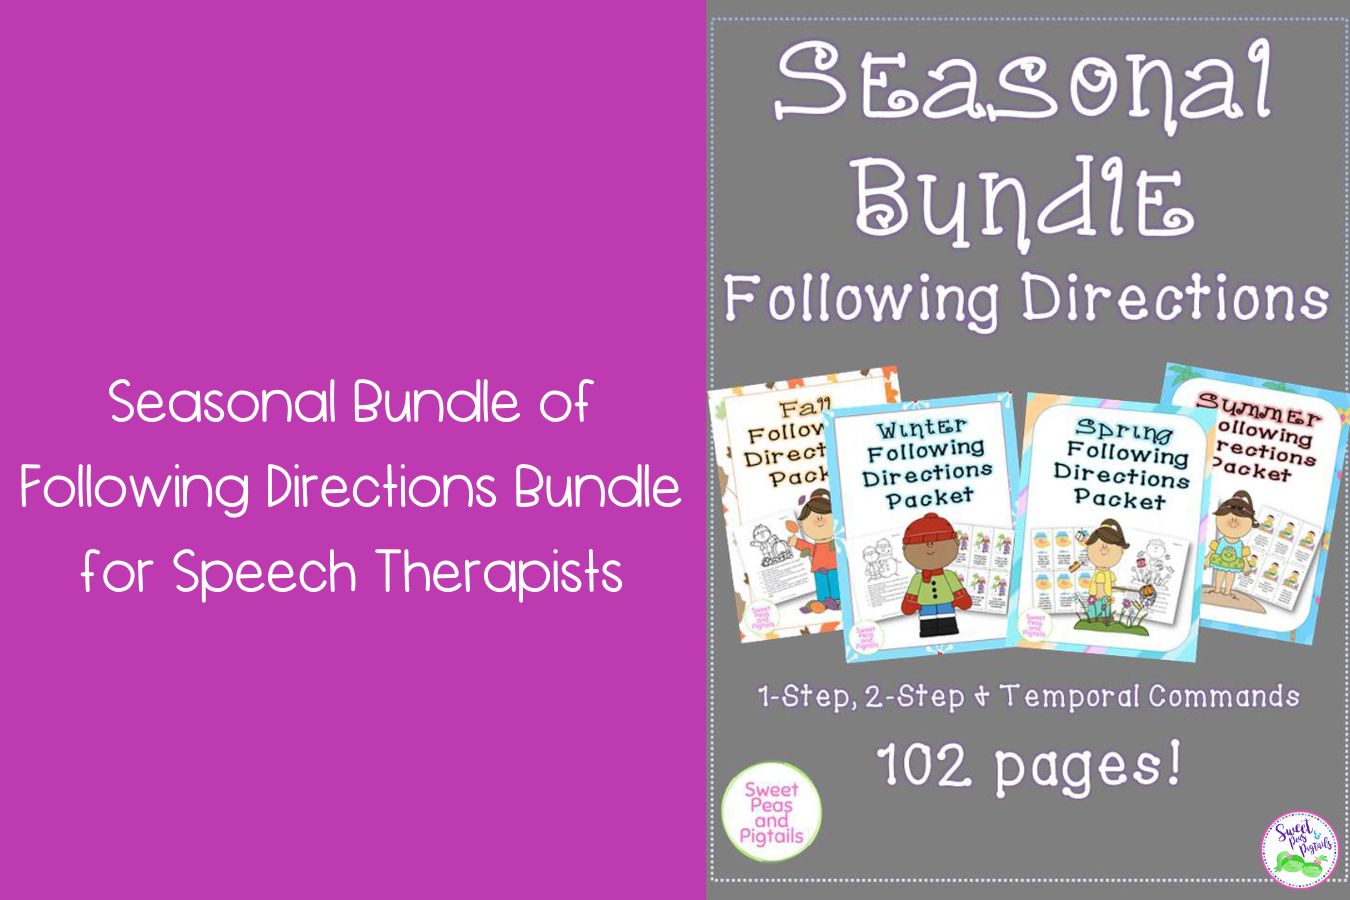 Seasonal Bundle of Following Directions Bundle for Speech Therapists Featured